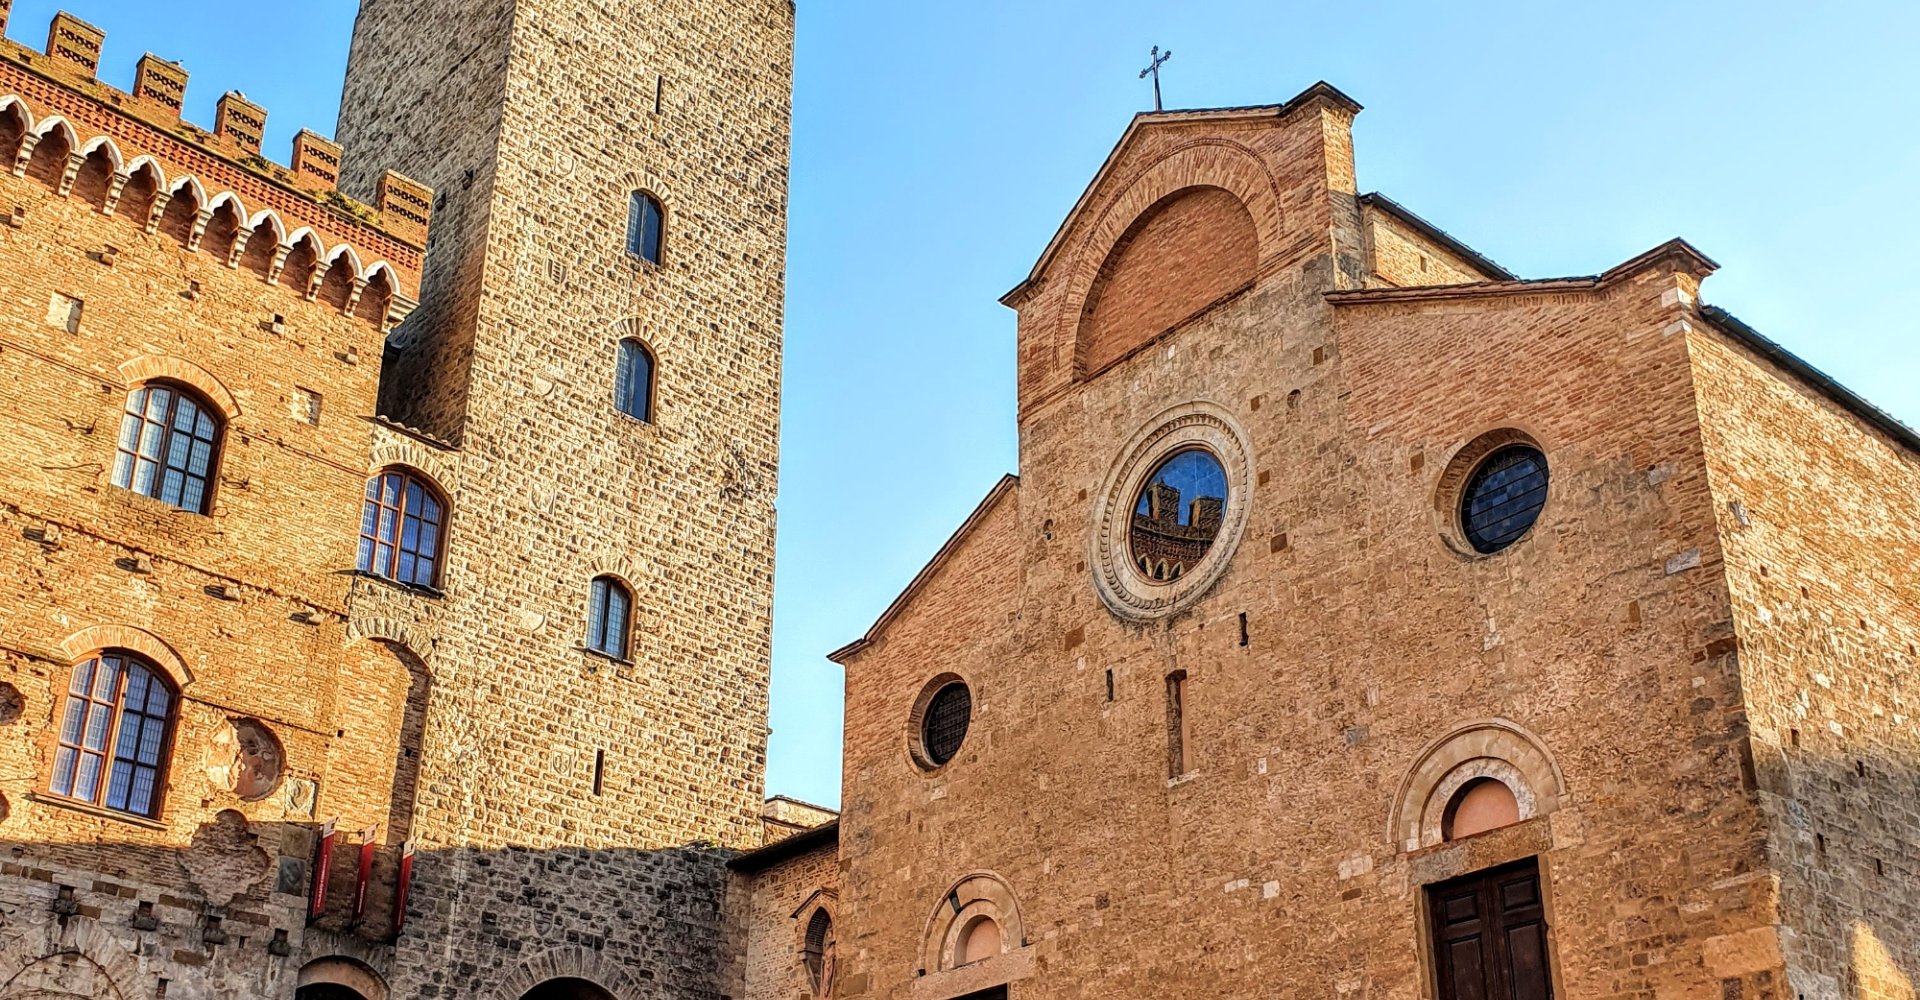 Cathedral of San Gimignano